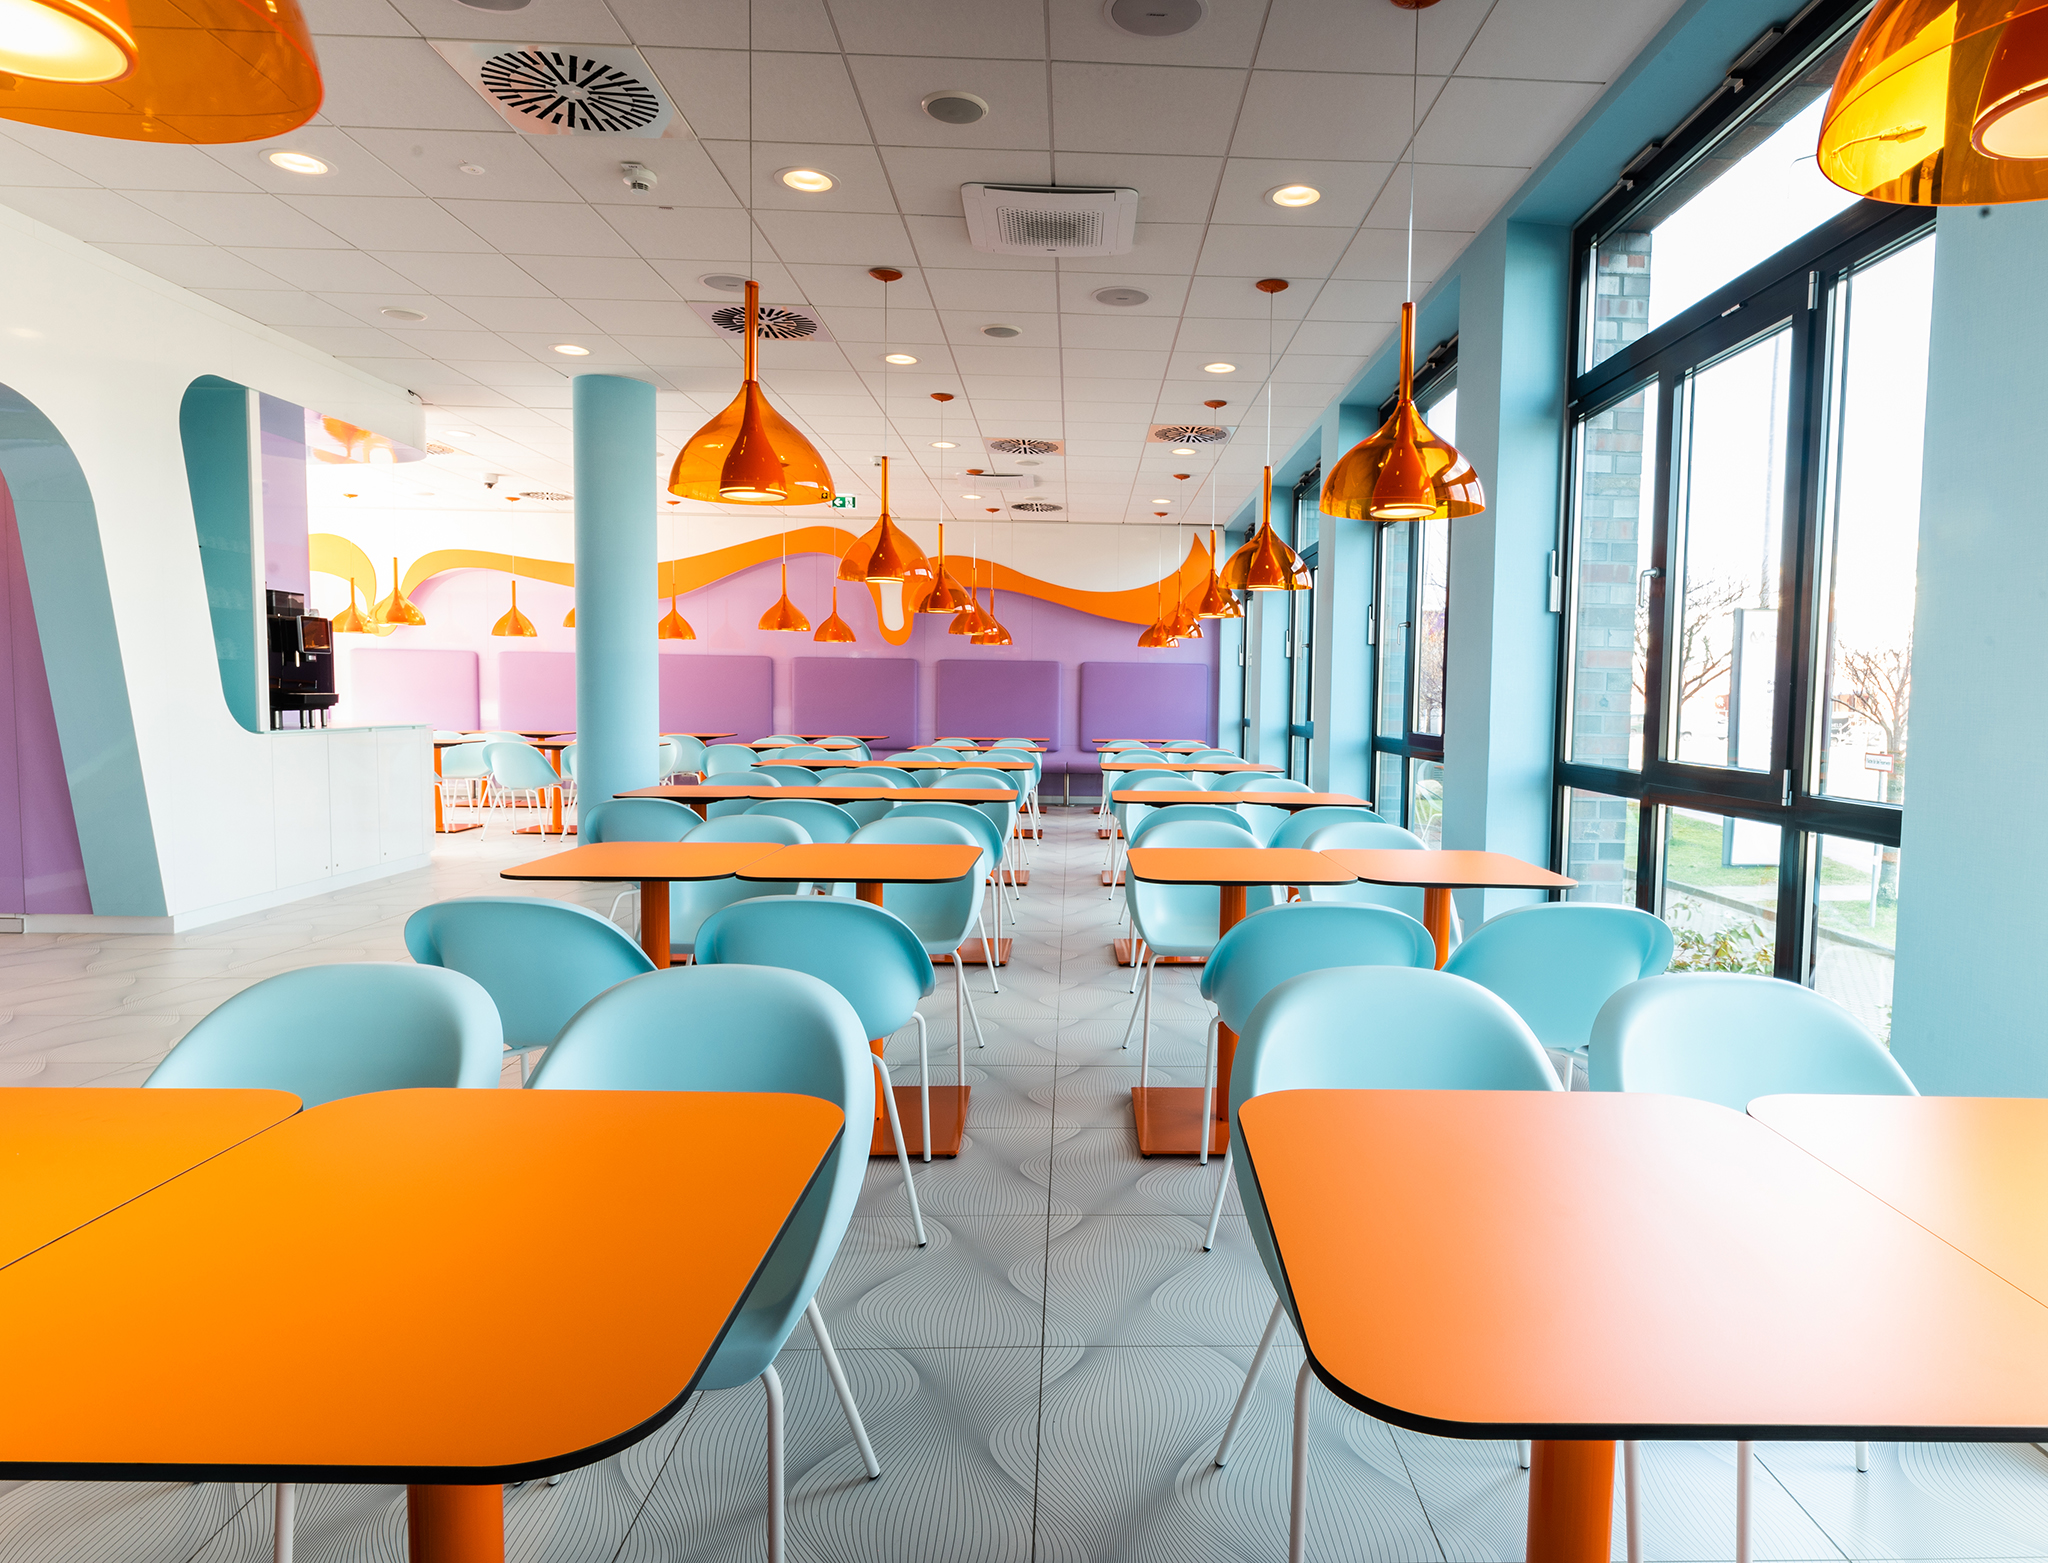 The modern dining room of the Hotel in Rostock in blue and orange